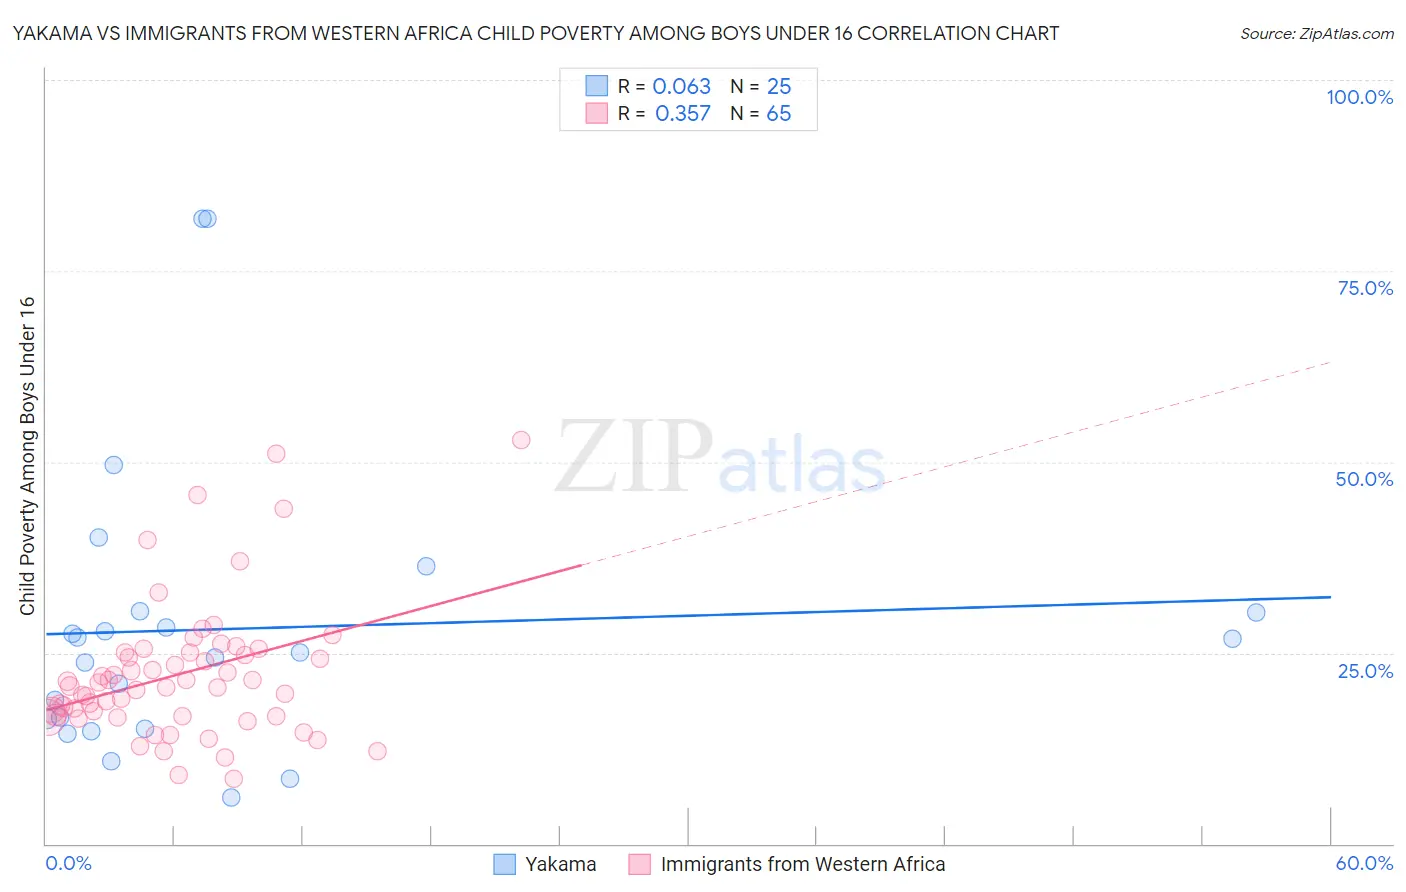 Yakama vs Immigrants from Western Africa Child Poverty Among Boys Under 16